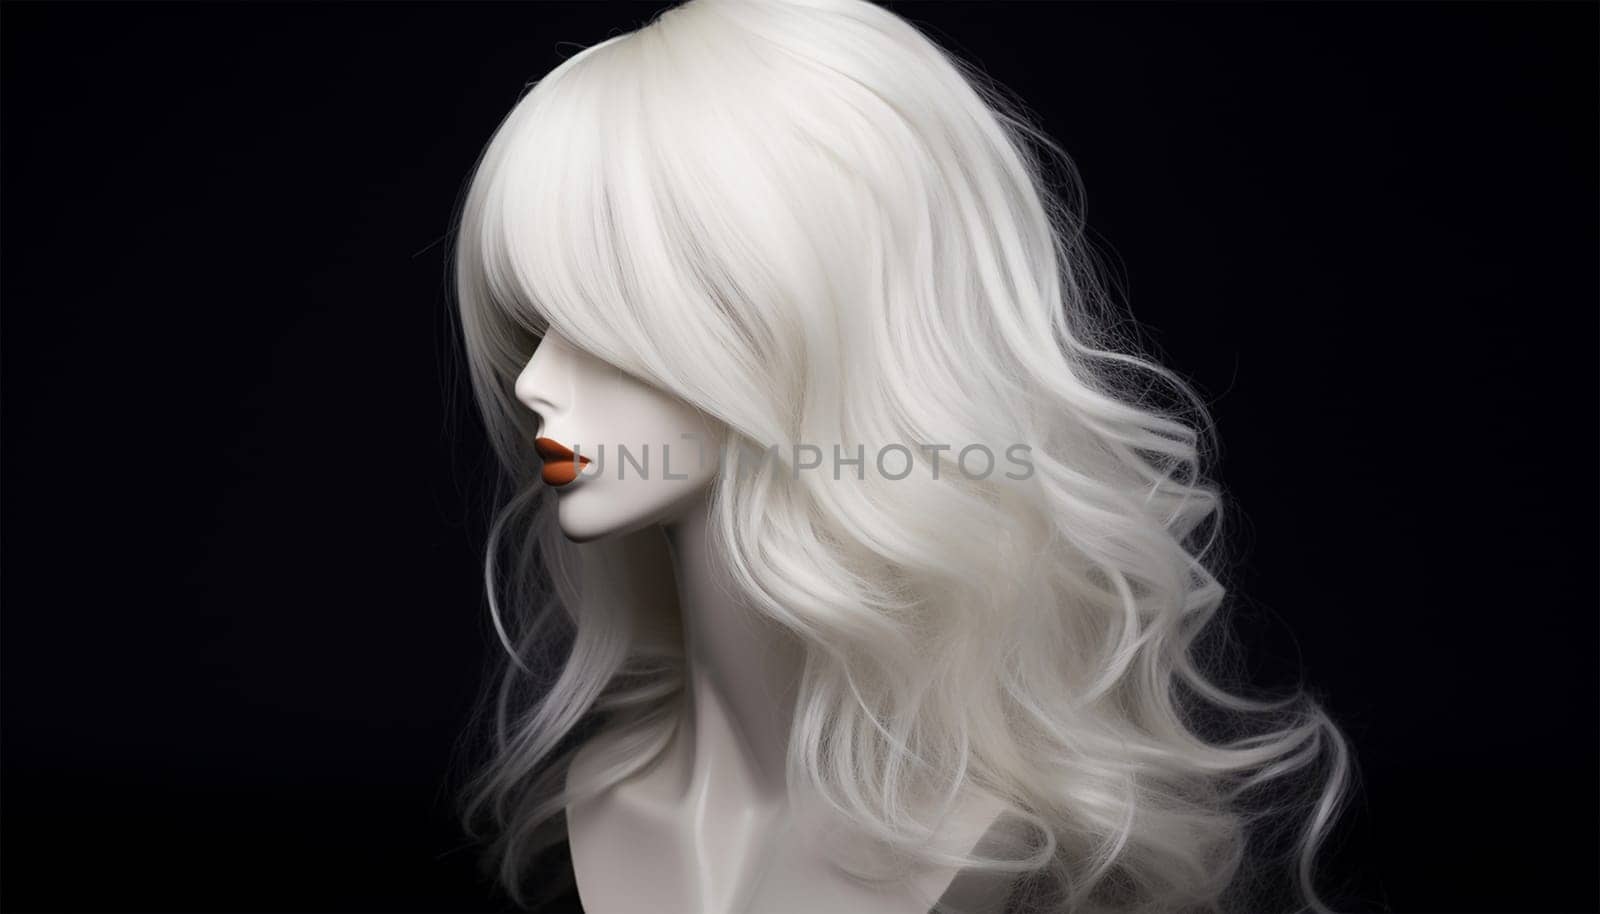 Natural looking blonde wig on white mannequin head. Long hair on the plastic wig holder isolated on black background, front view woman design by Annebel146